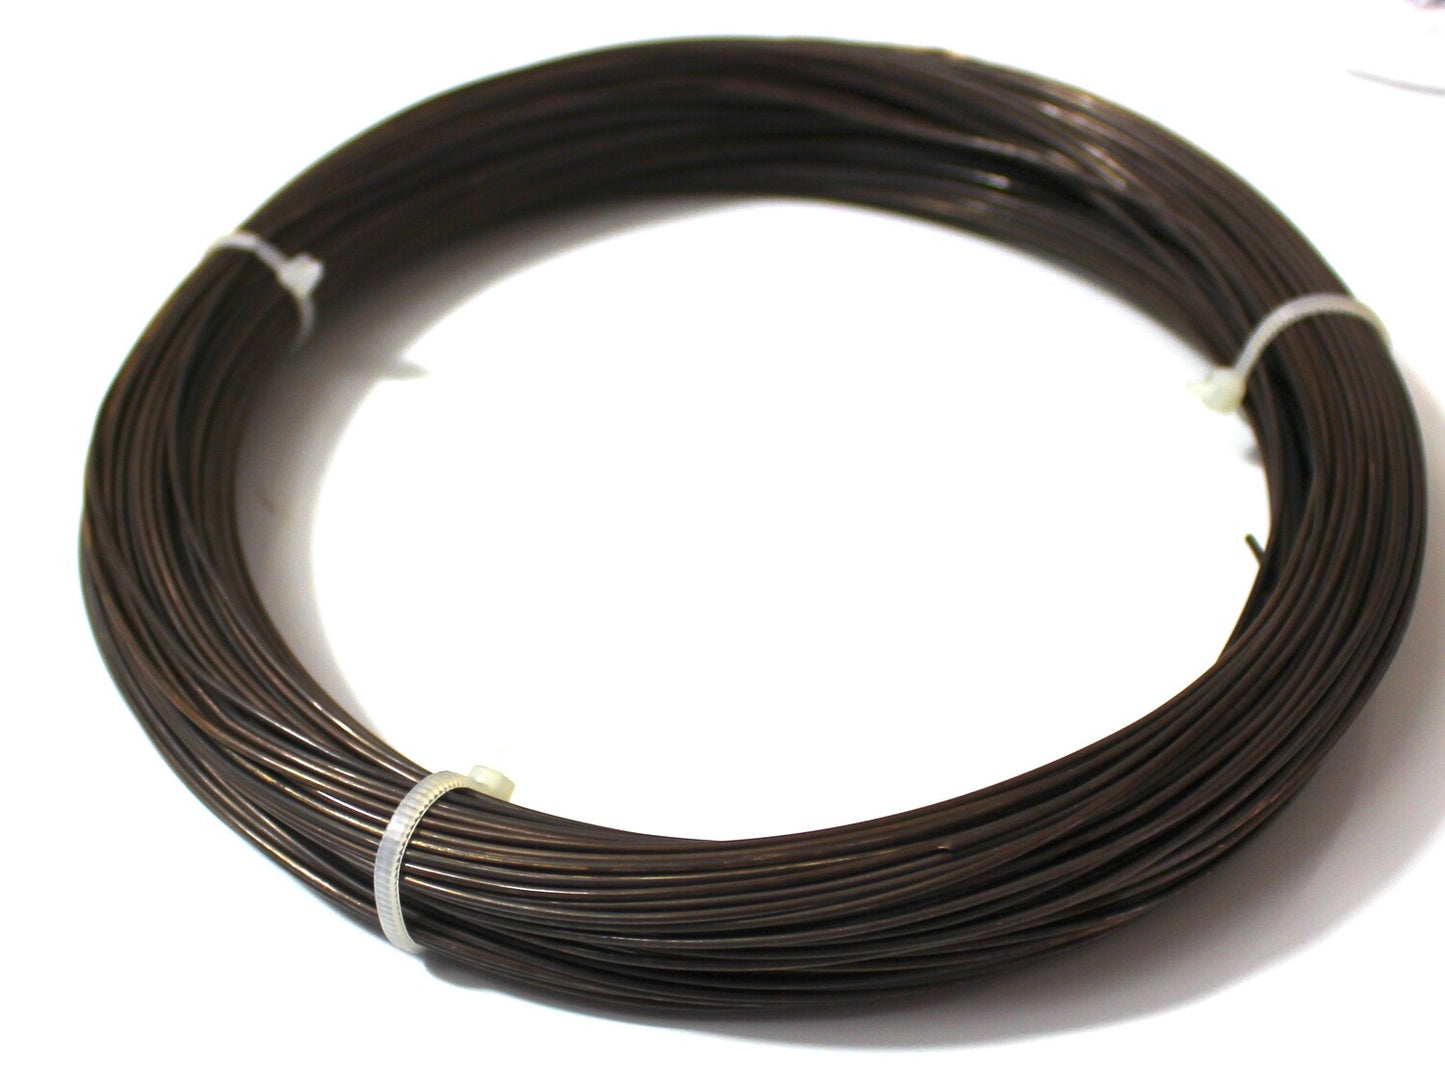 Copper Bonsai Styling Wire 500 gram pack - choose the size you require